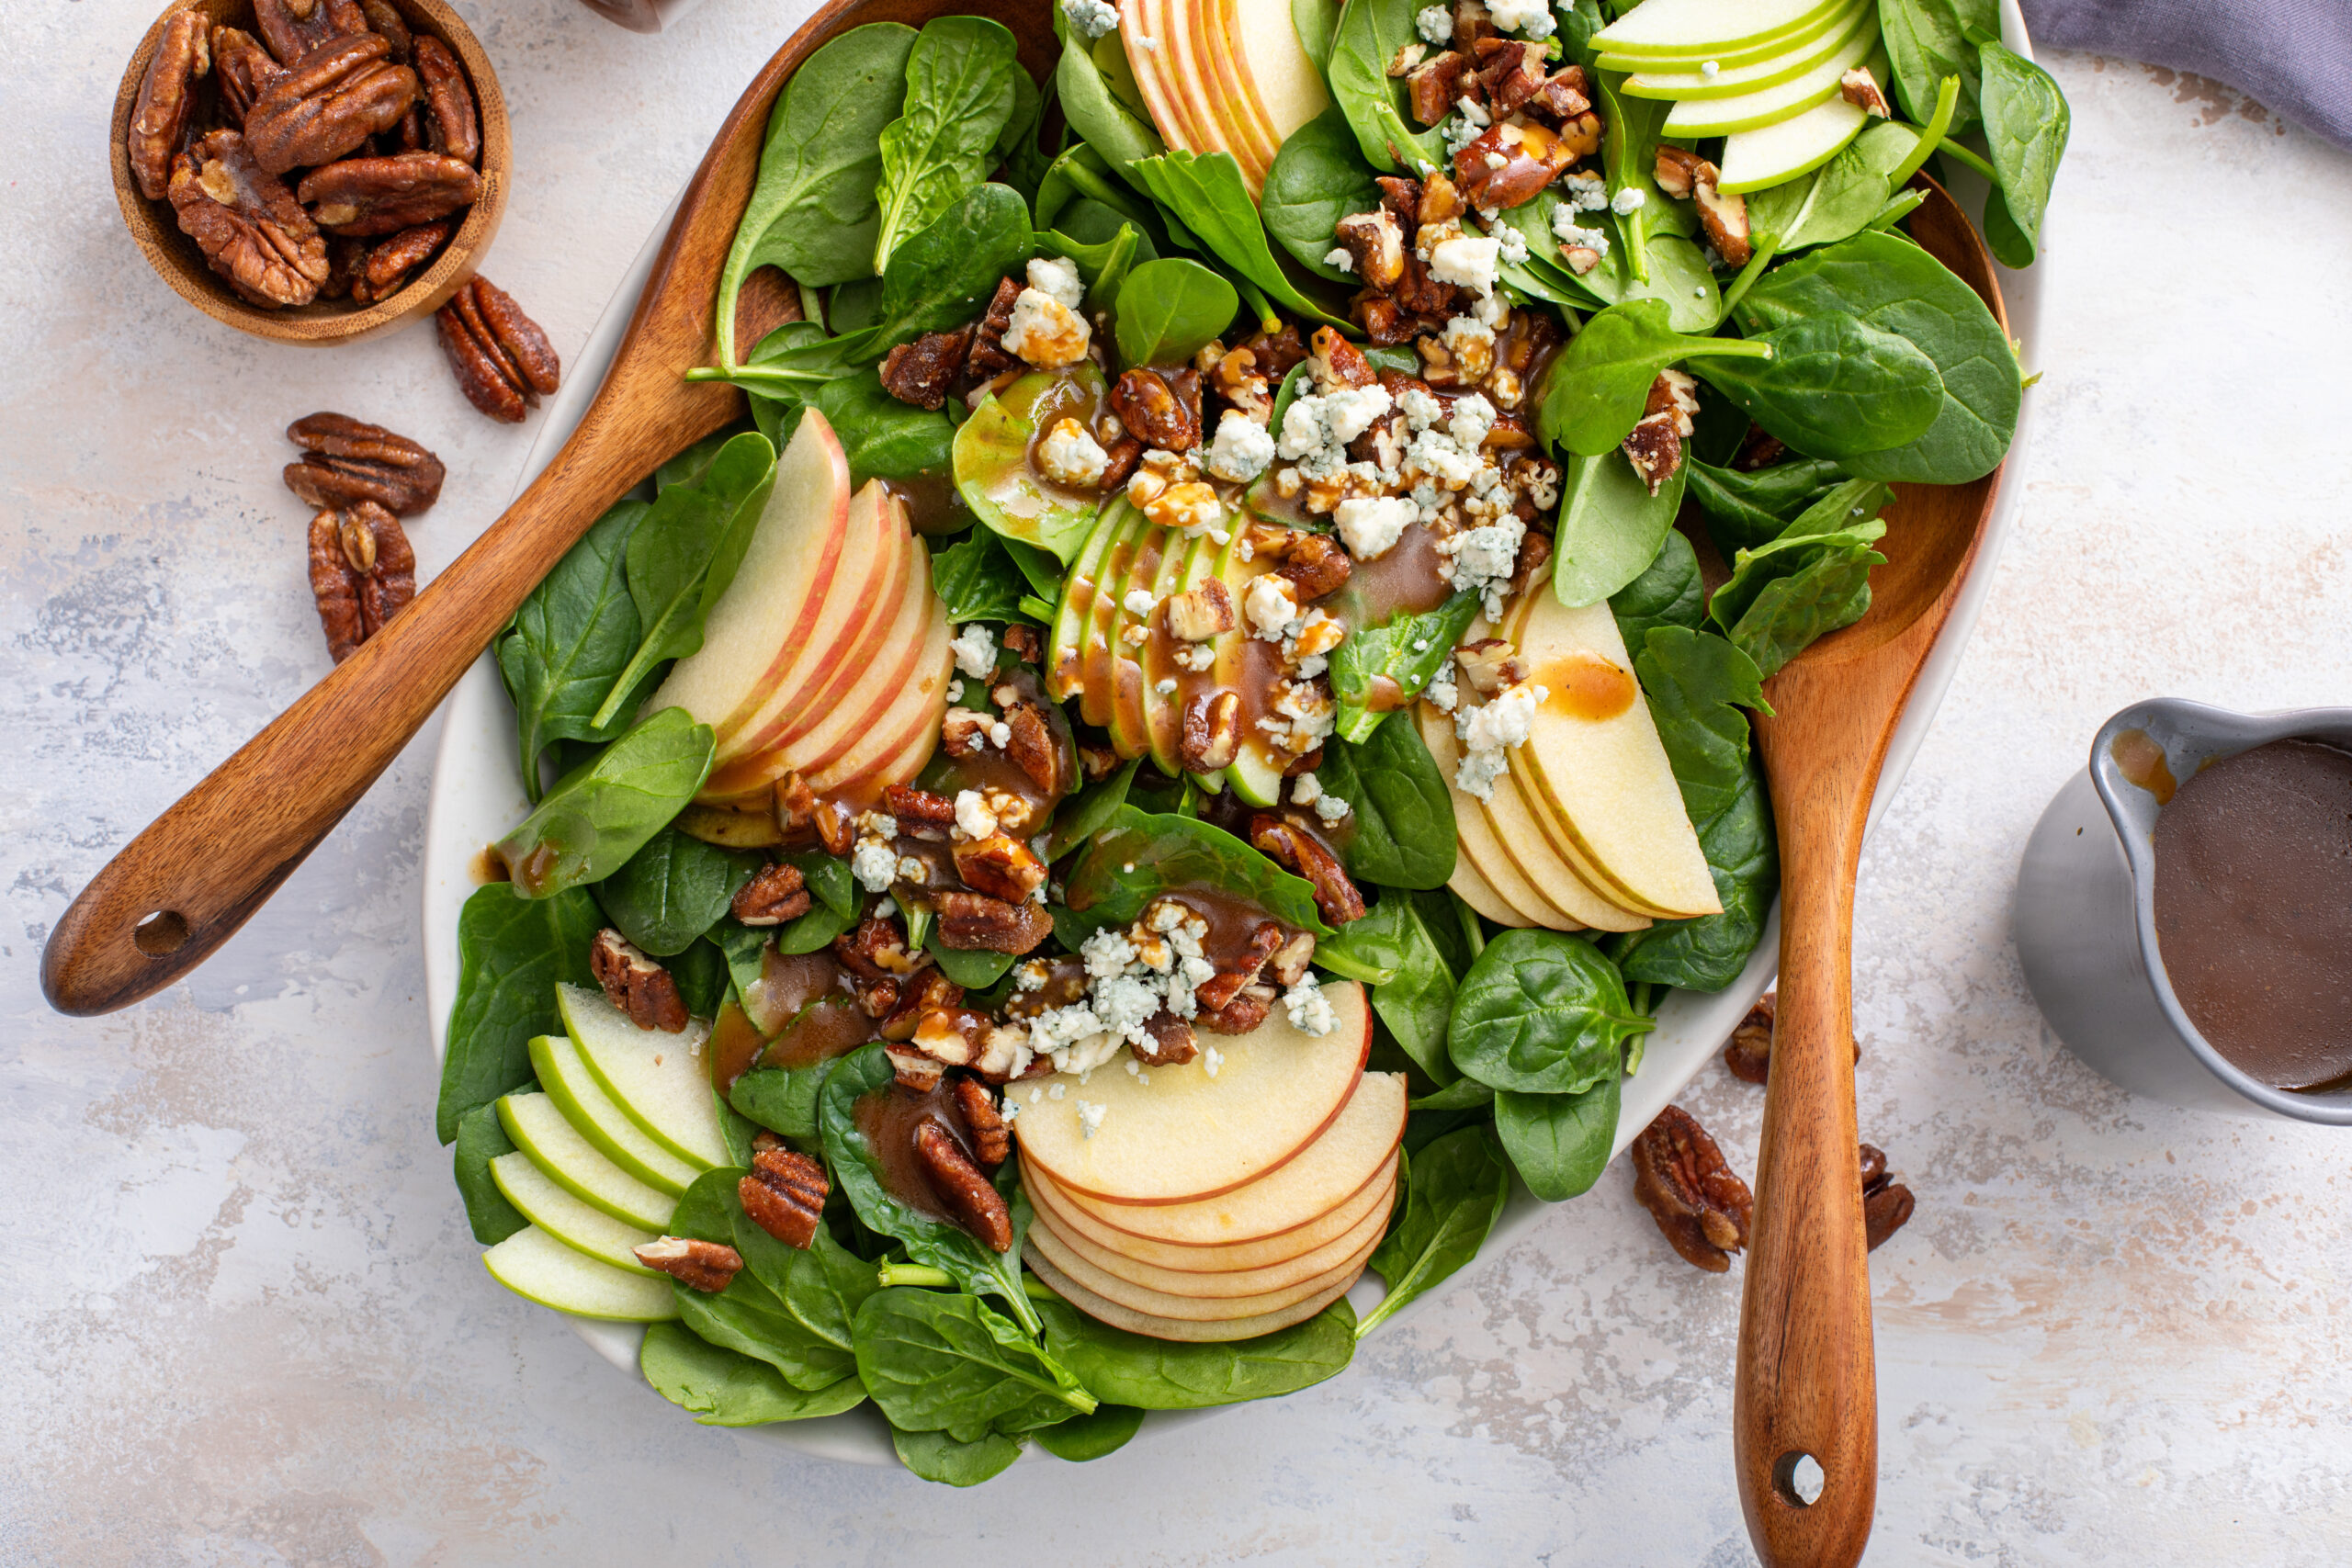 A delicious and hearty winter salad full of nuts, fruit and cheese that is perfect for an appetizer or add a bit of protein and make it a meal. CLICK here to make it ASAP!